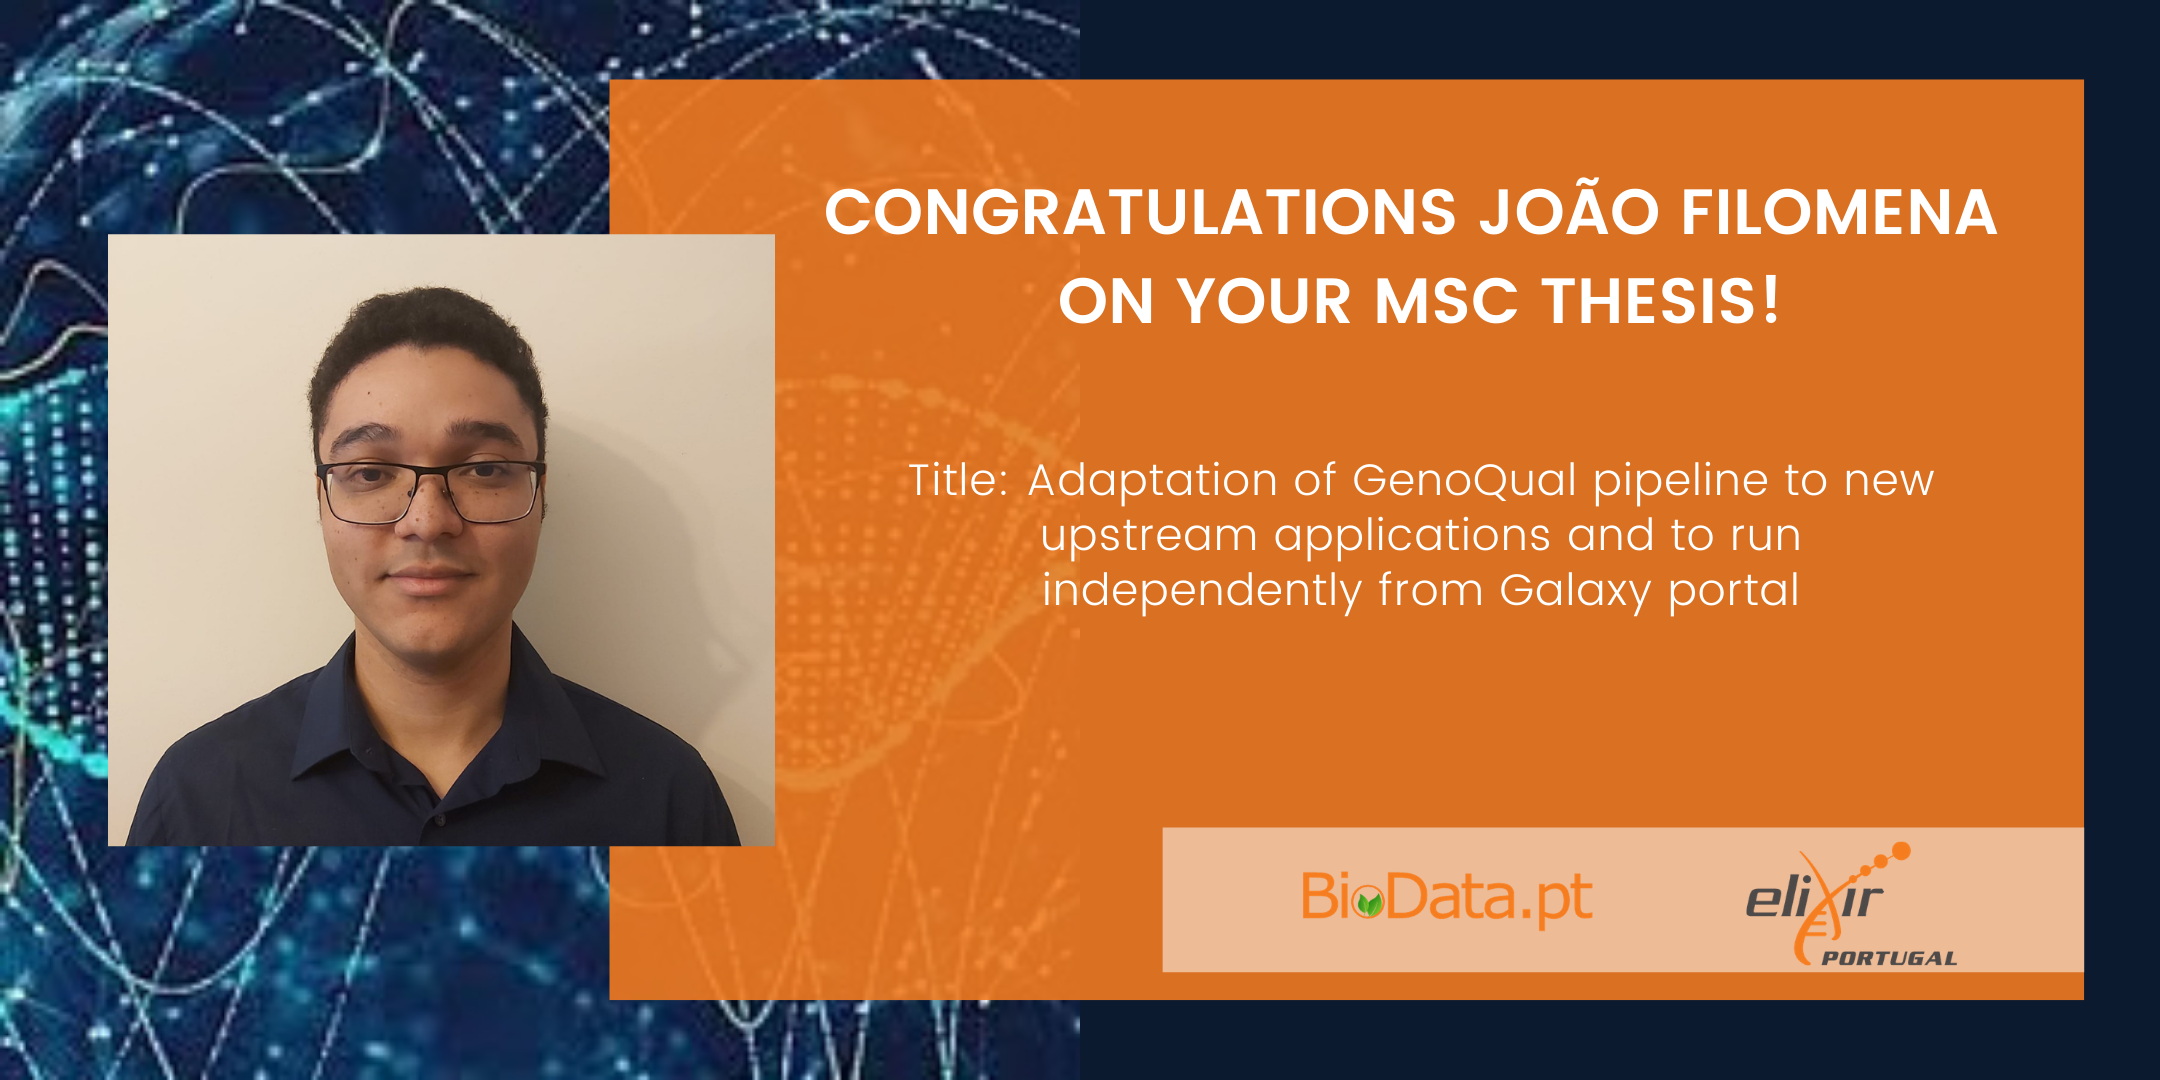 Congratulations João Filomena on your MSc Thesis! Title: Adaptation of GenoQual pipeline to new upstream applications and to run independently from Galaxy portal